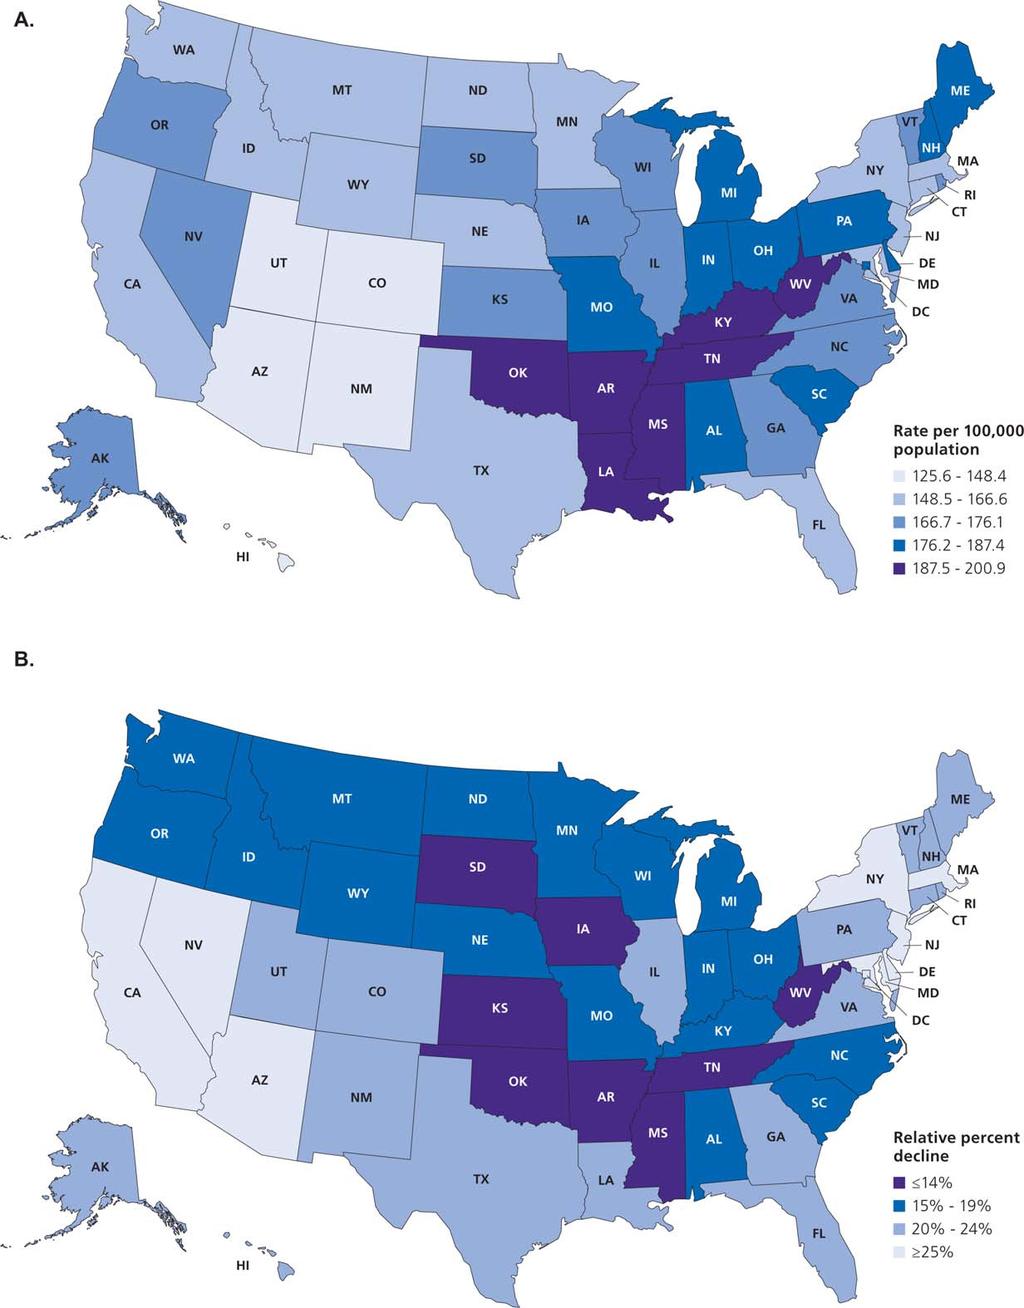 FIGURE 4. Geographic Patterns in Cancer Death Rates in 2011 (A) and in the Relative Decline (%) in Cancer Death Rates from 1990 1992 to 2011 (B).